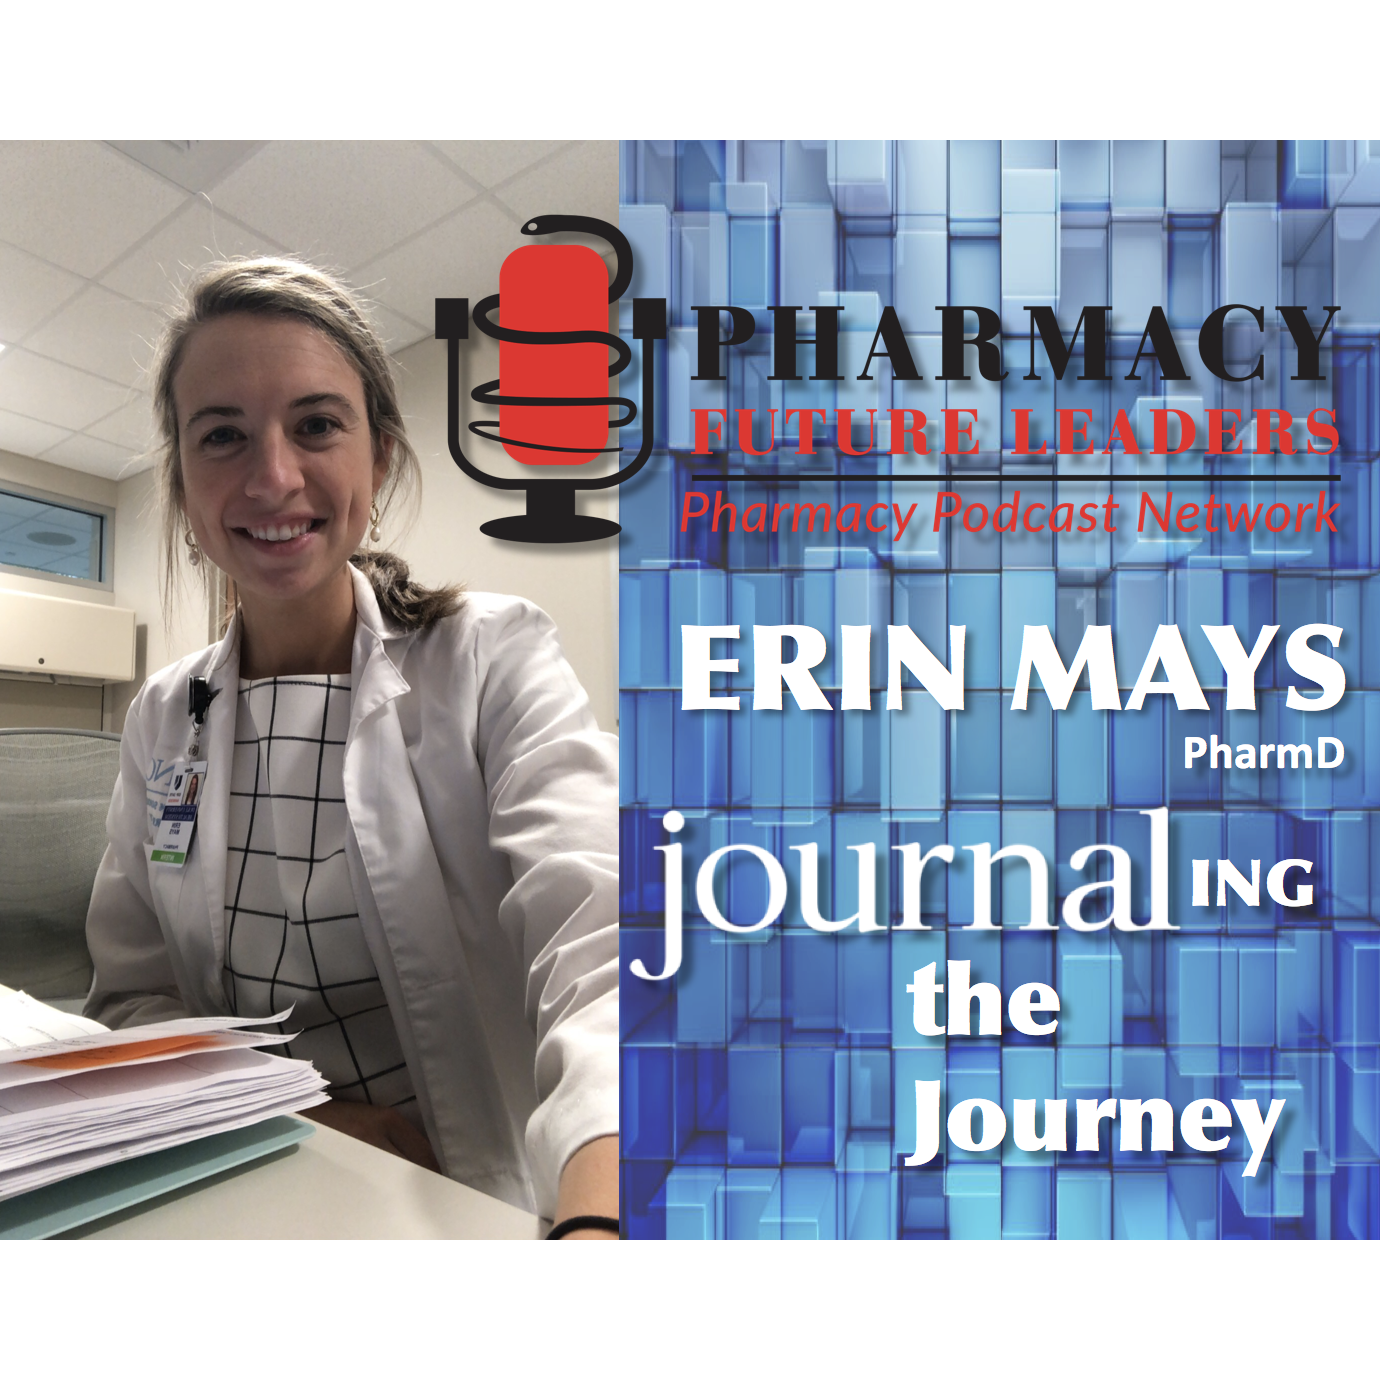 Journaling the Journey with Dr. Erin Mays, PharmD | Pharmacy Future Leaders